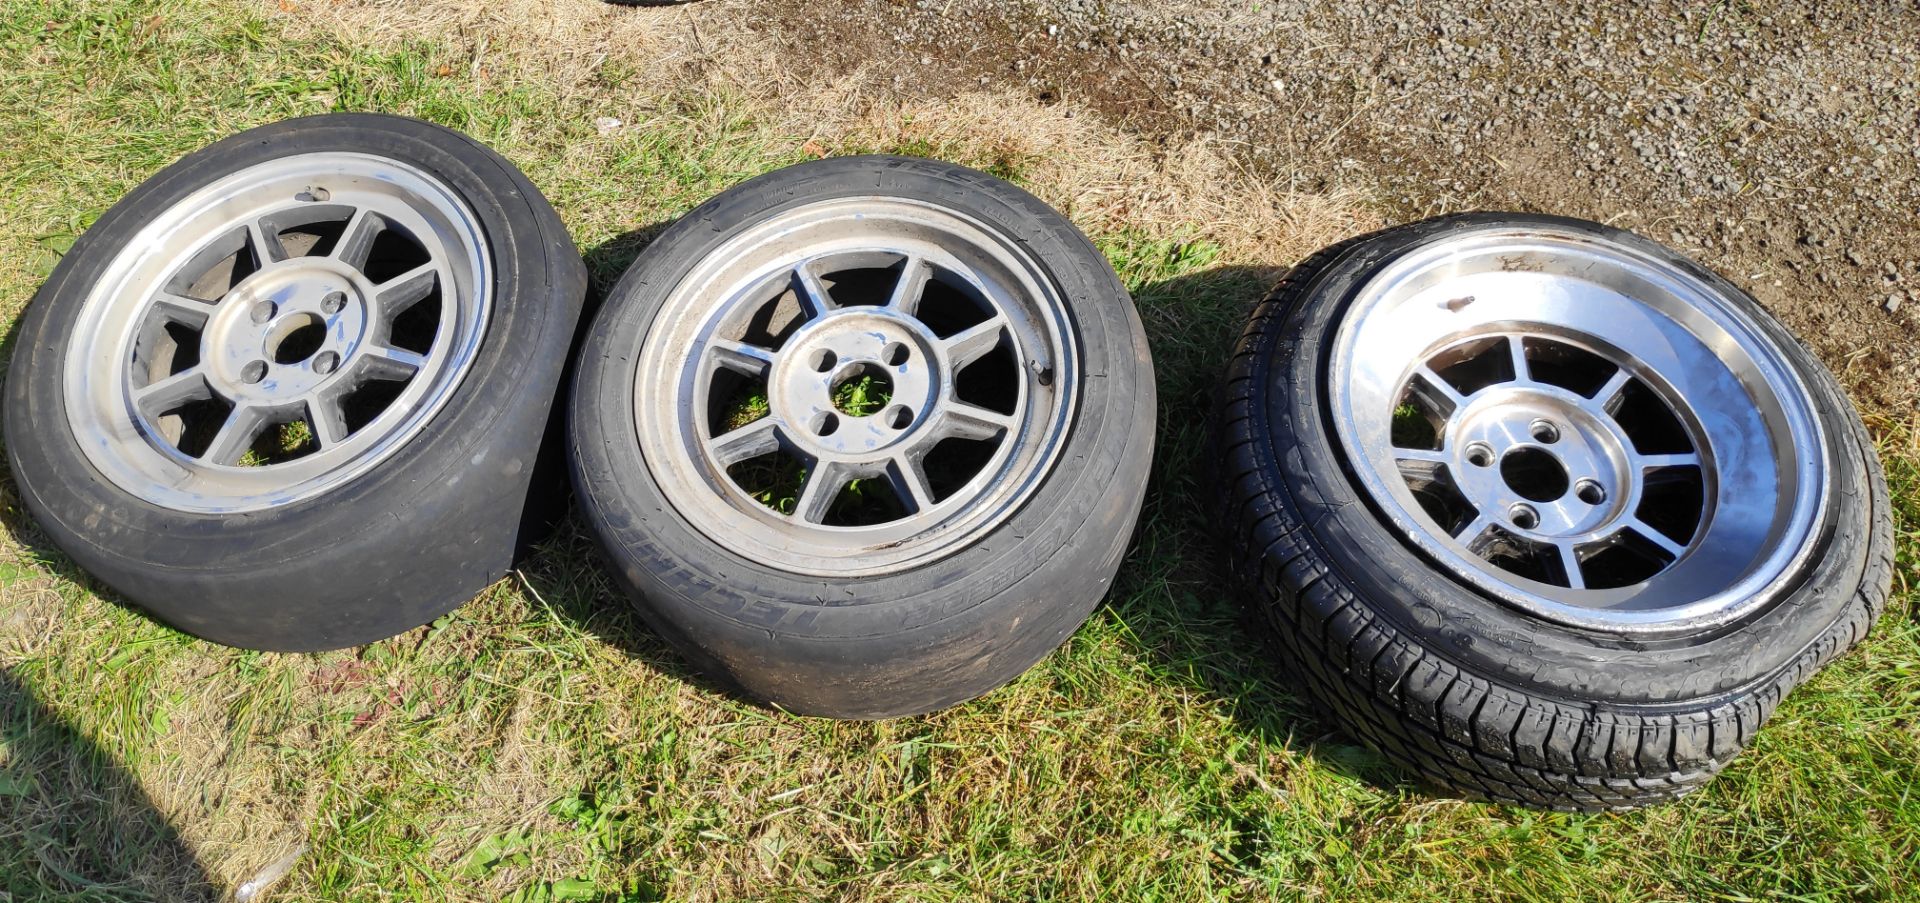 1 x 2000 Mazda MX5 Mk2 Drift Car - Includes 3 Extra Wheels/Tyres - Ref: T4 - CL682 - Location: Bedfo - Image 24 of 77